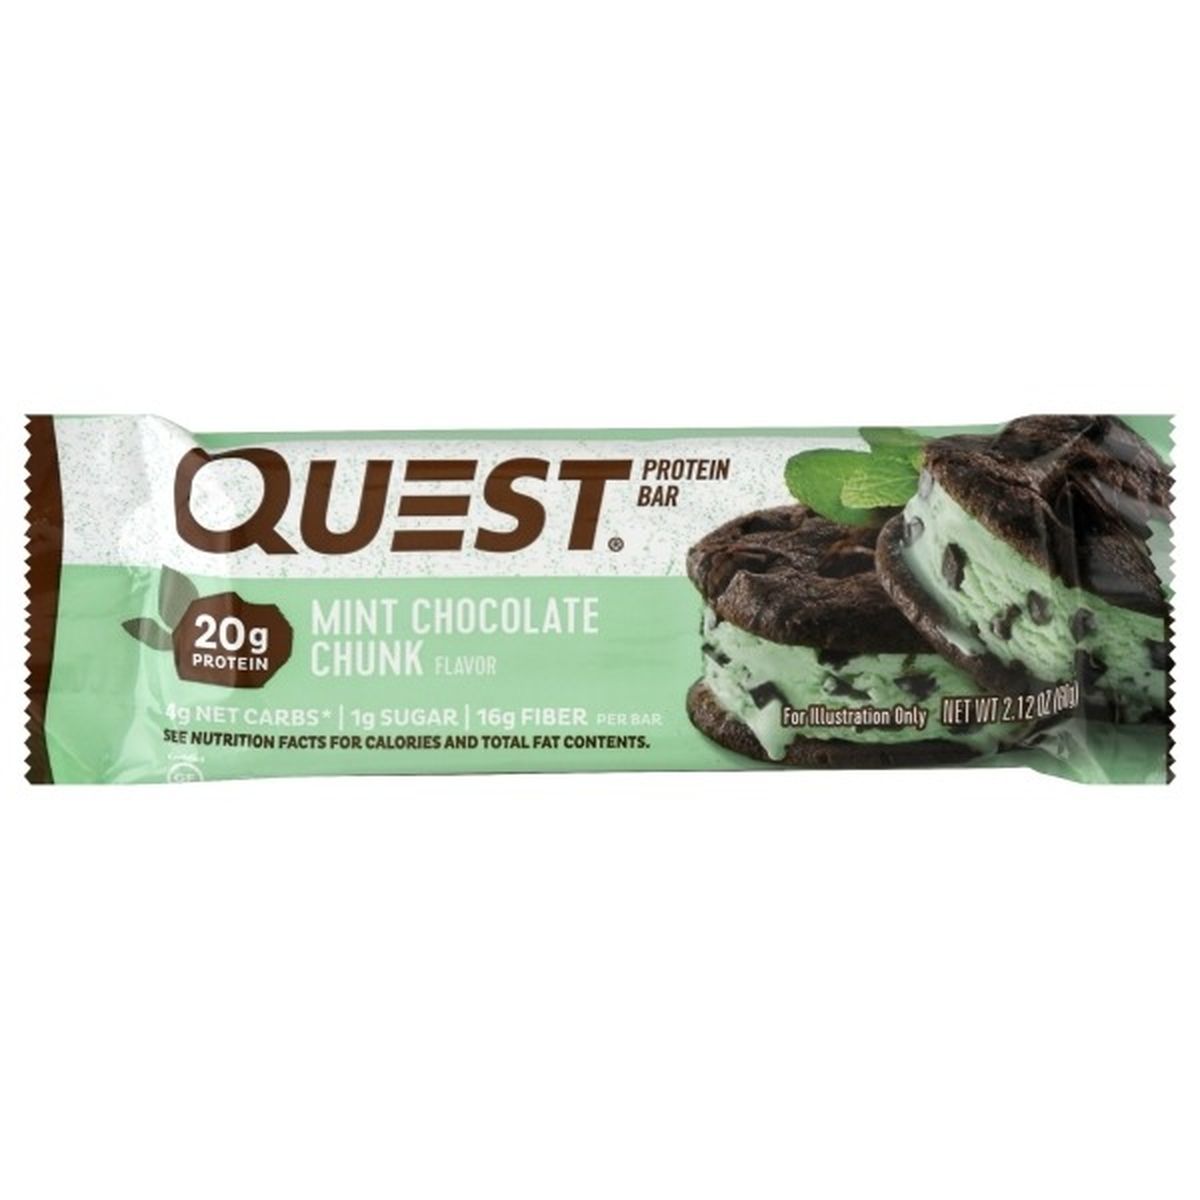 Calories in Quest Protein Bar, Milk Chocolate Chunk Flavor